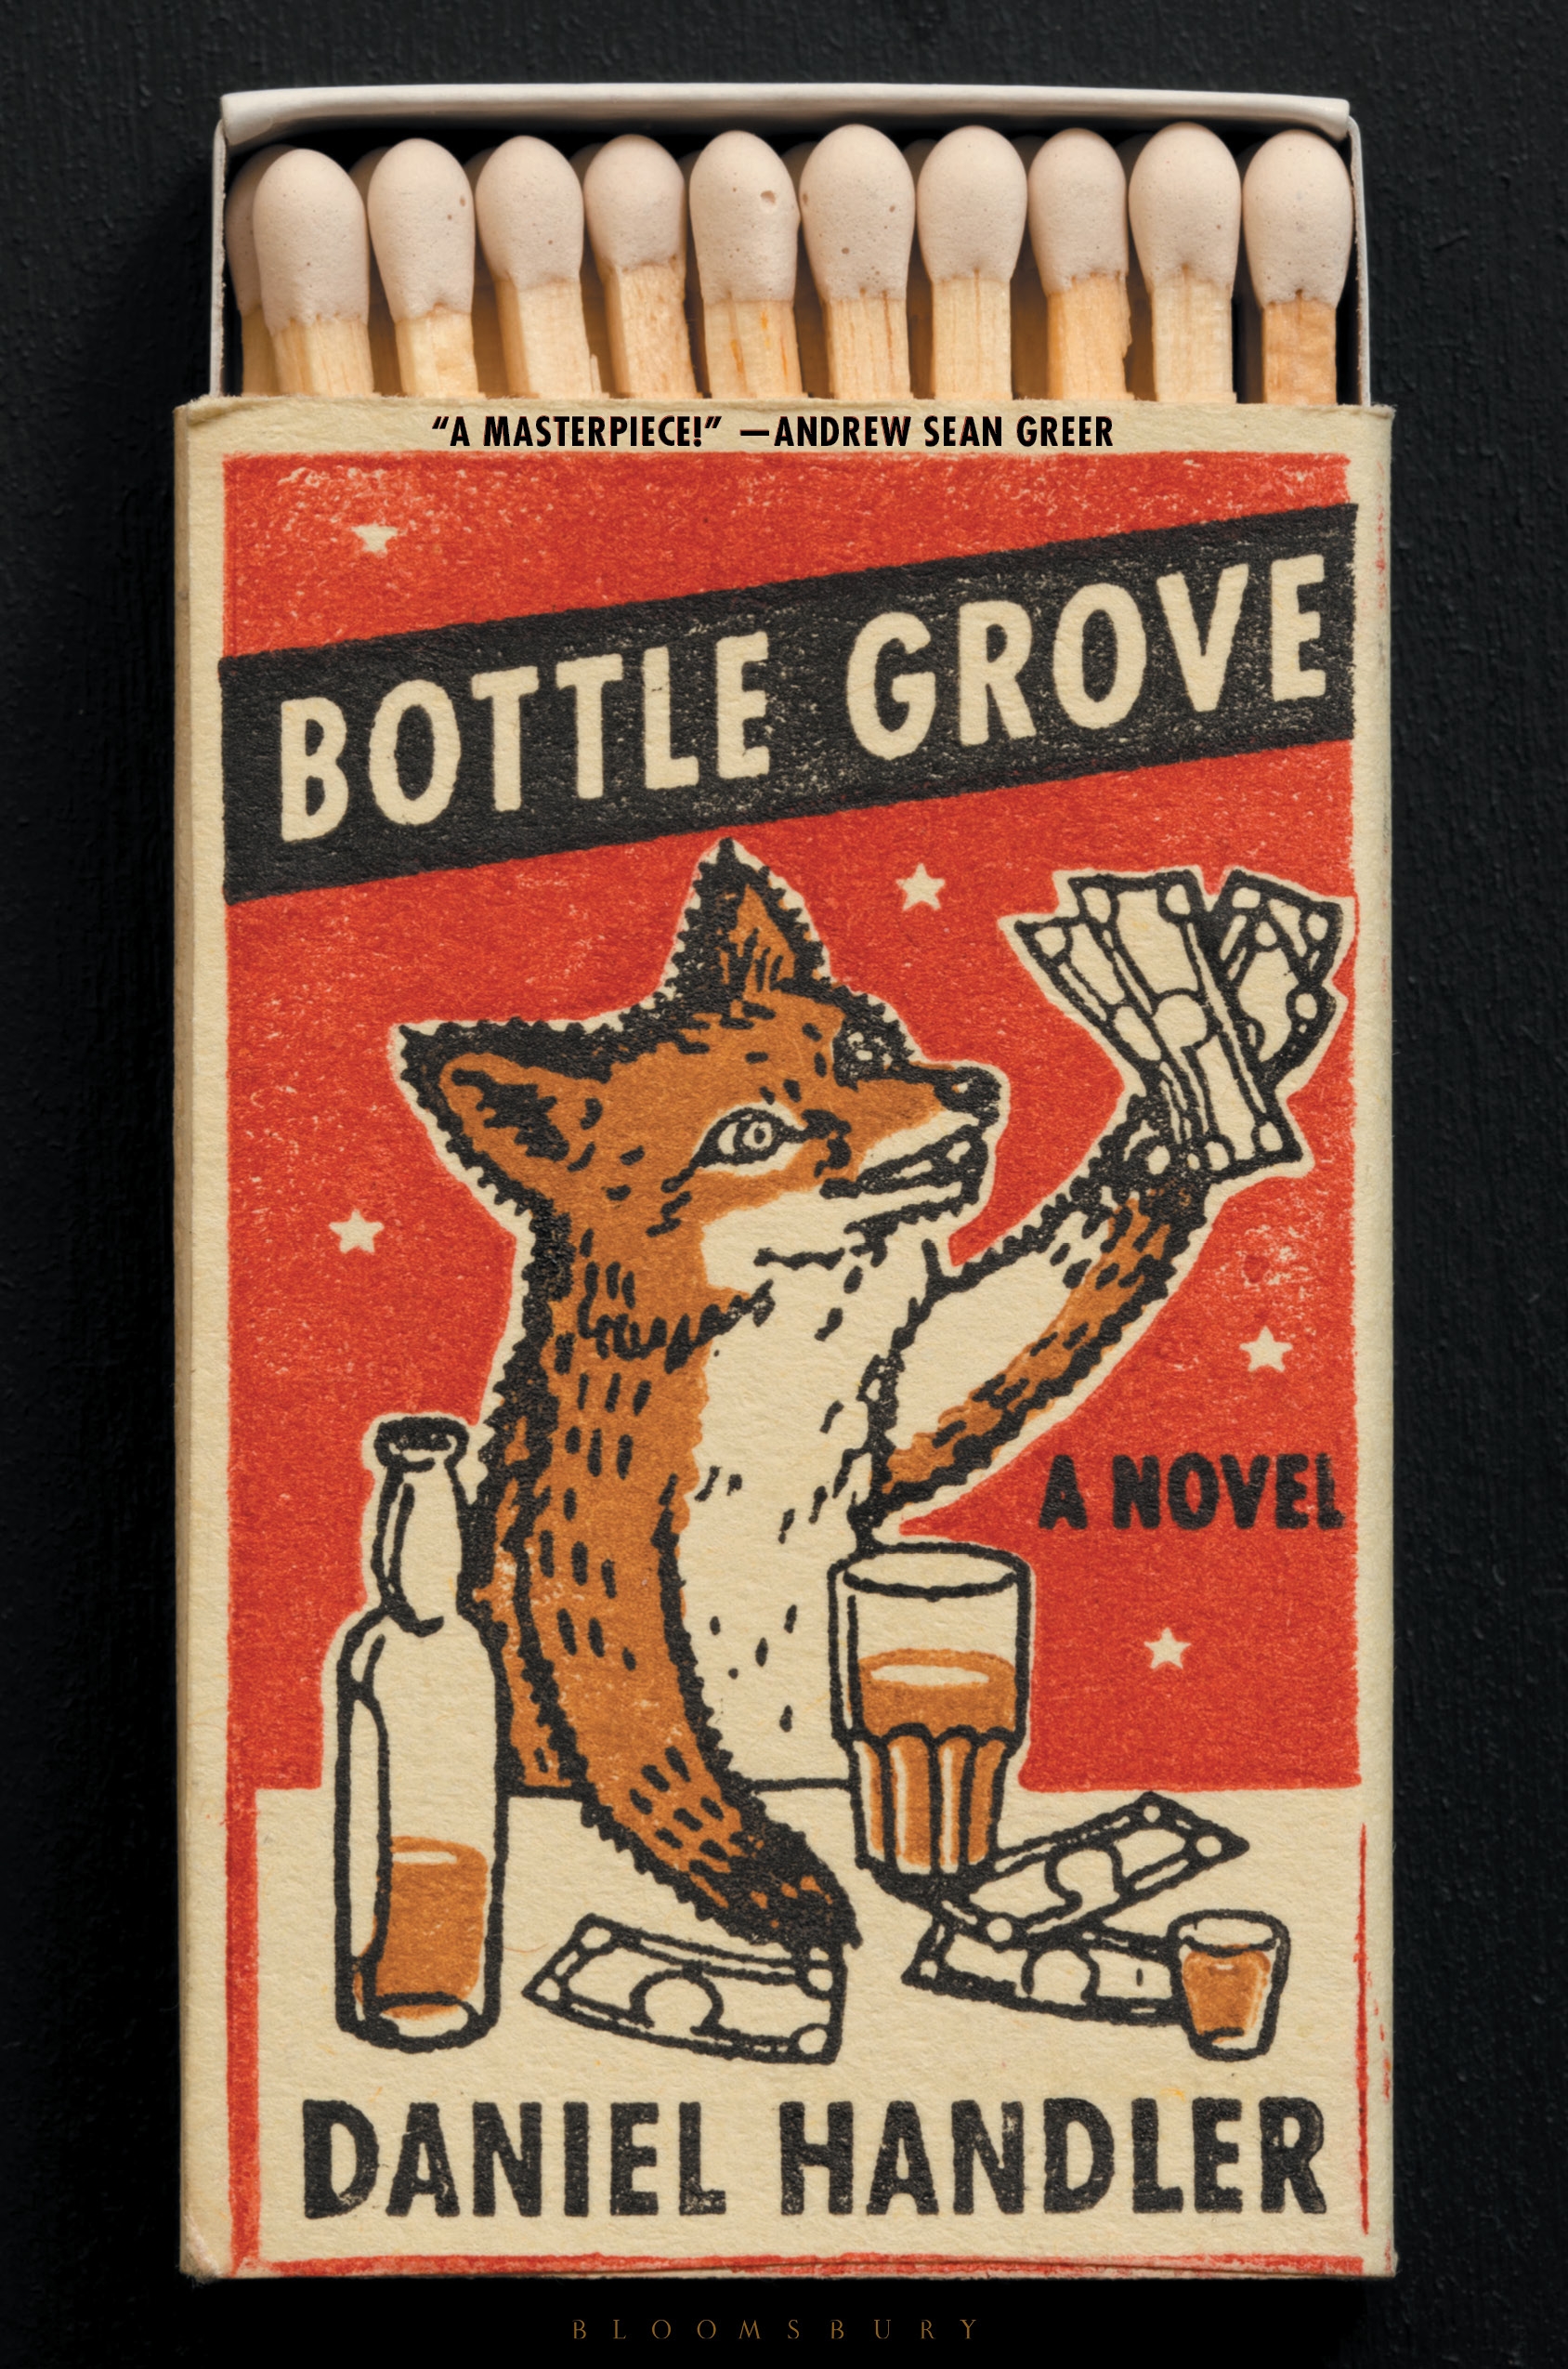 Book Launch: Bottle Grove by Daniel Handler in conversation with Chelsea Hodson